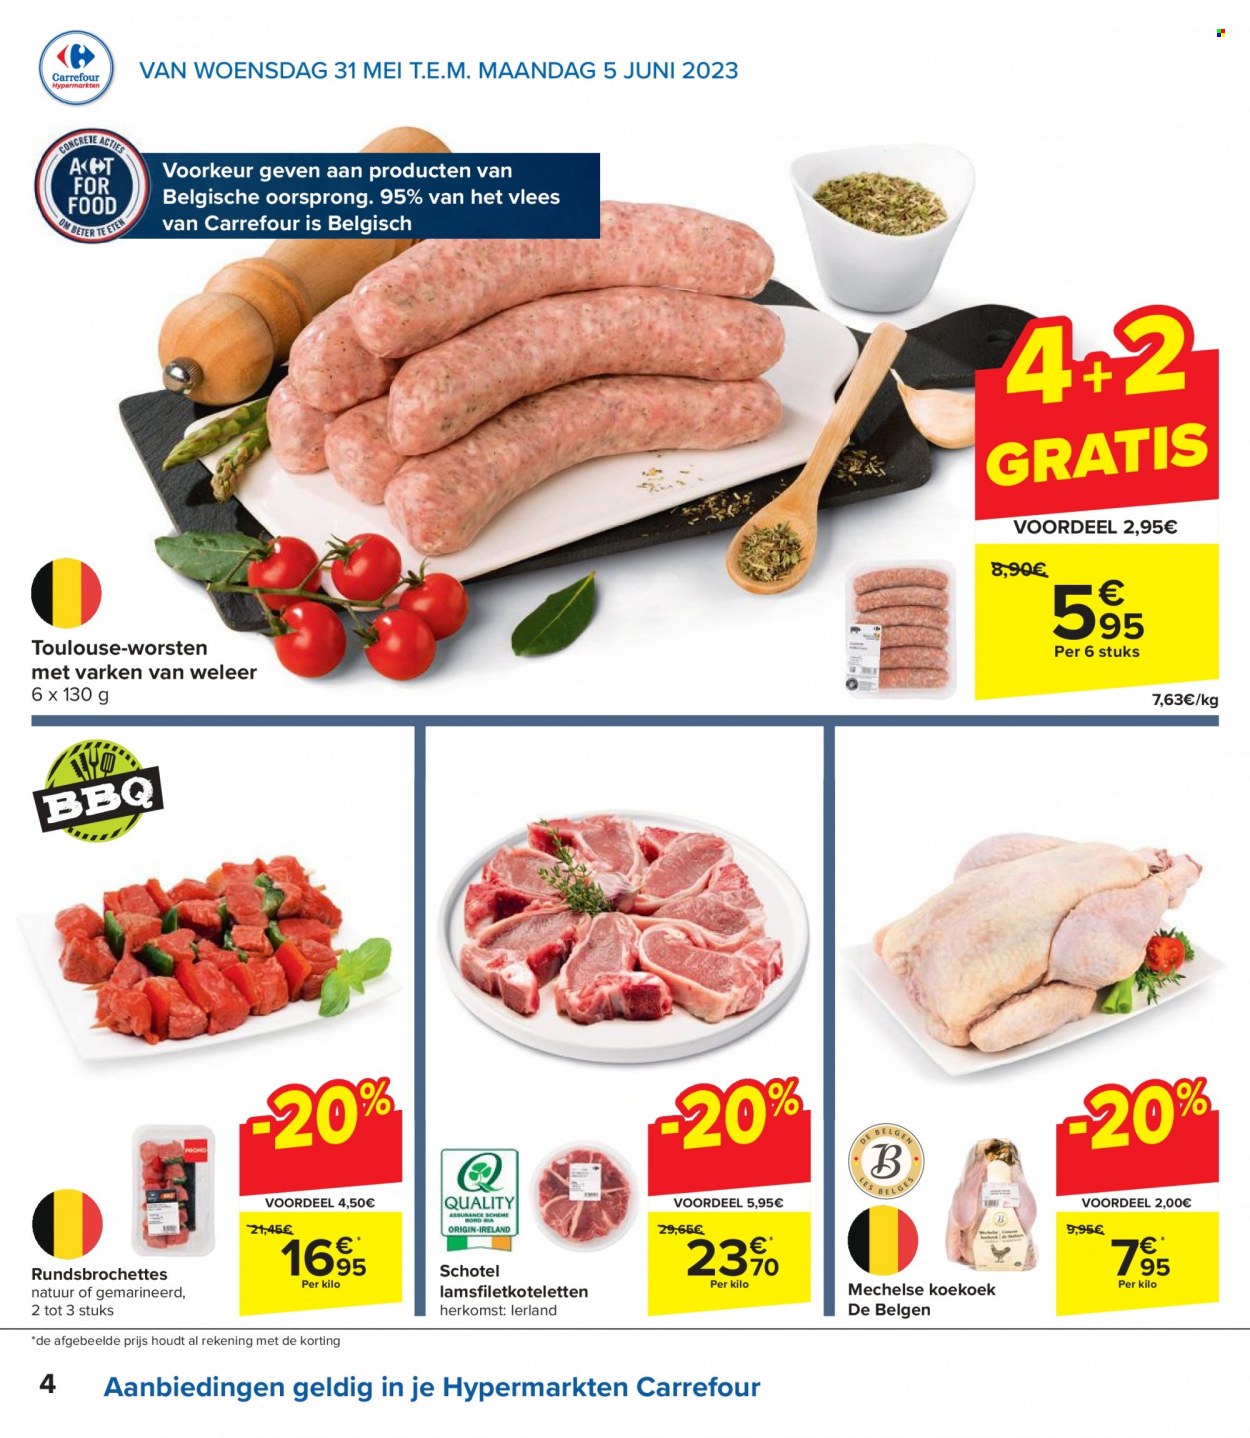 Catalogue Carrefour hypermarkt - 31.5.2023 - 12.6.2023. Page 4.